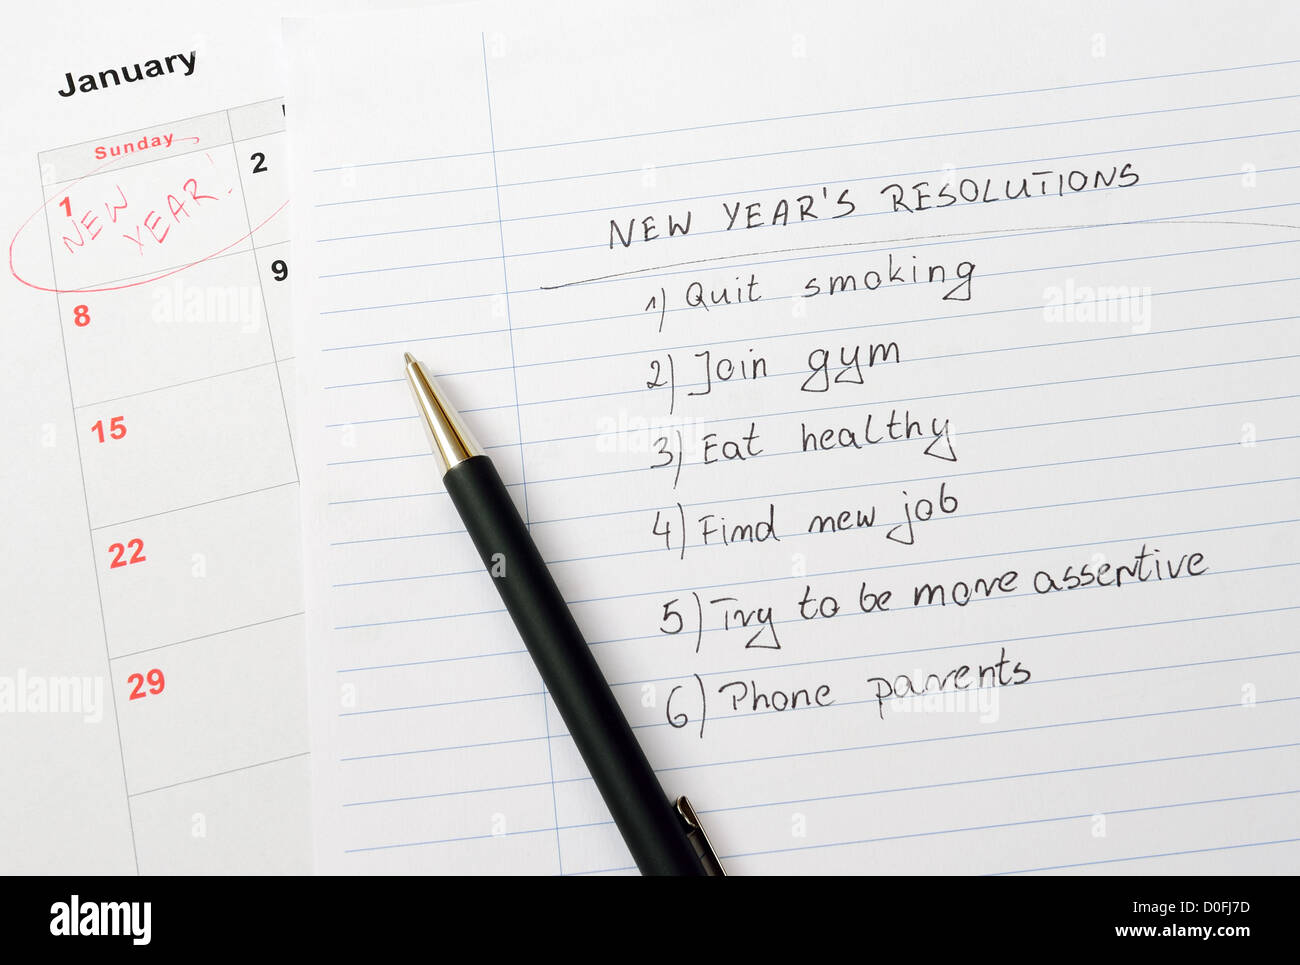 New Year's resolutions listed in notepad Stock Photo